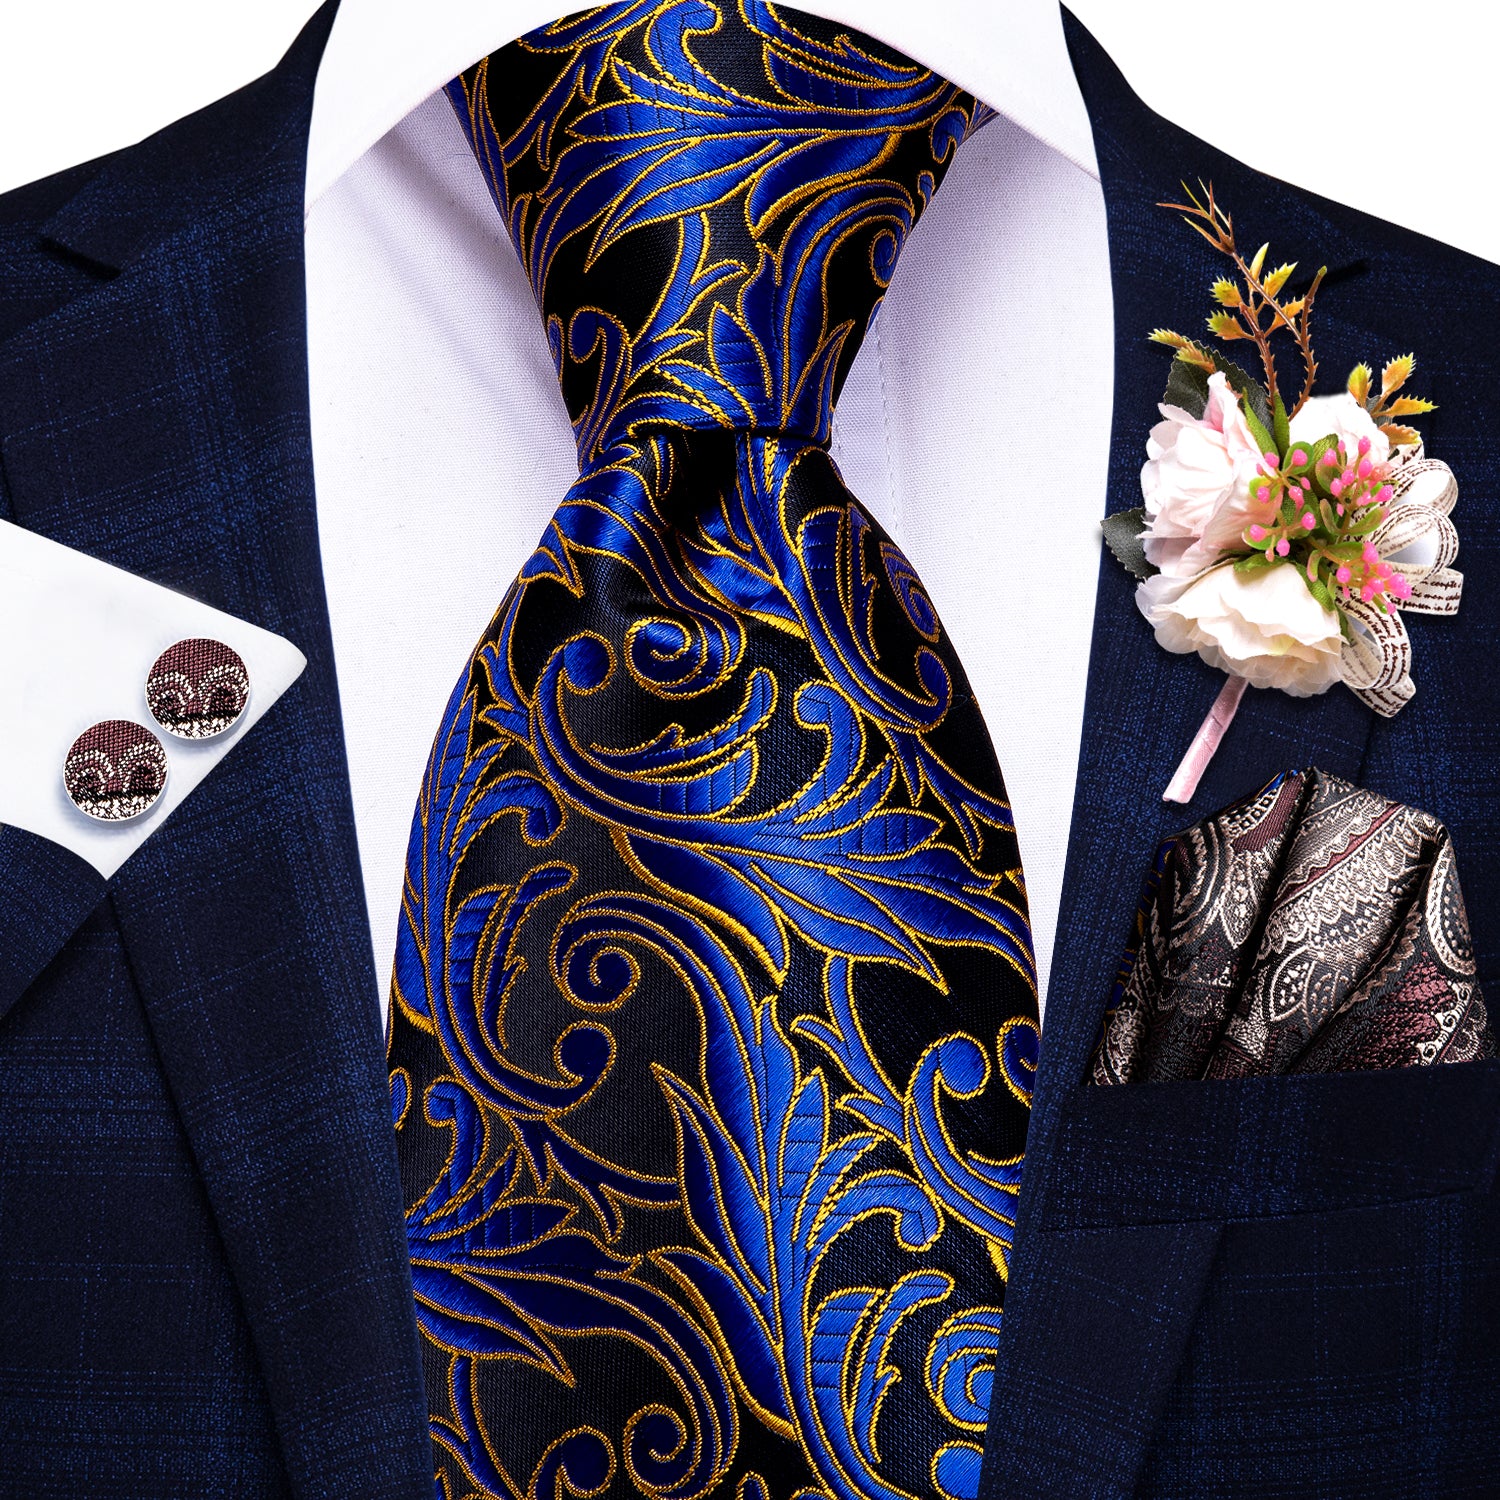 Black Blue Yellow Floral Tie Pocket Square Cufflinks Set with Wedding Brooch